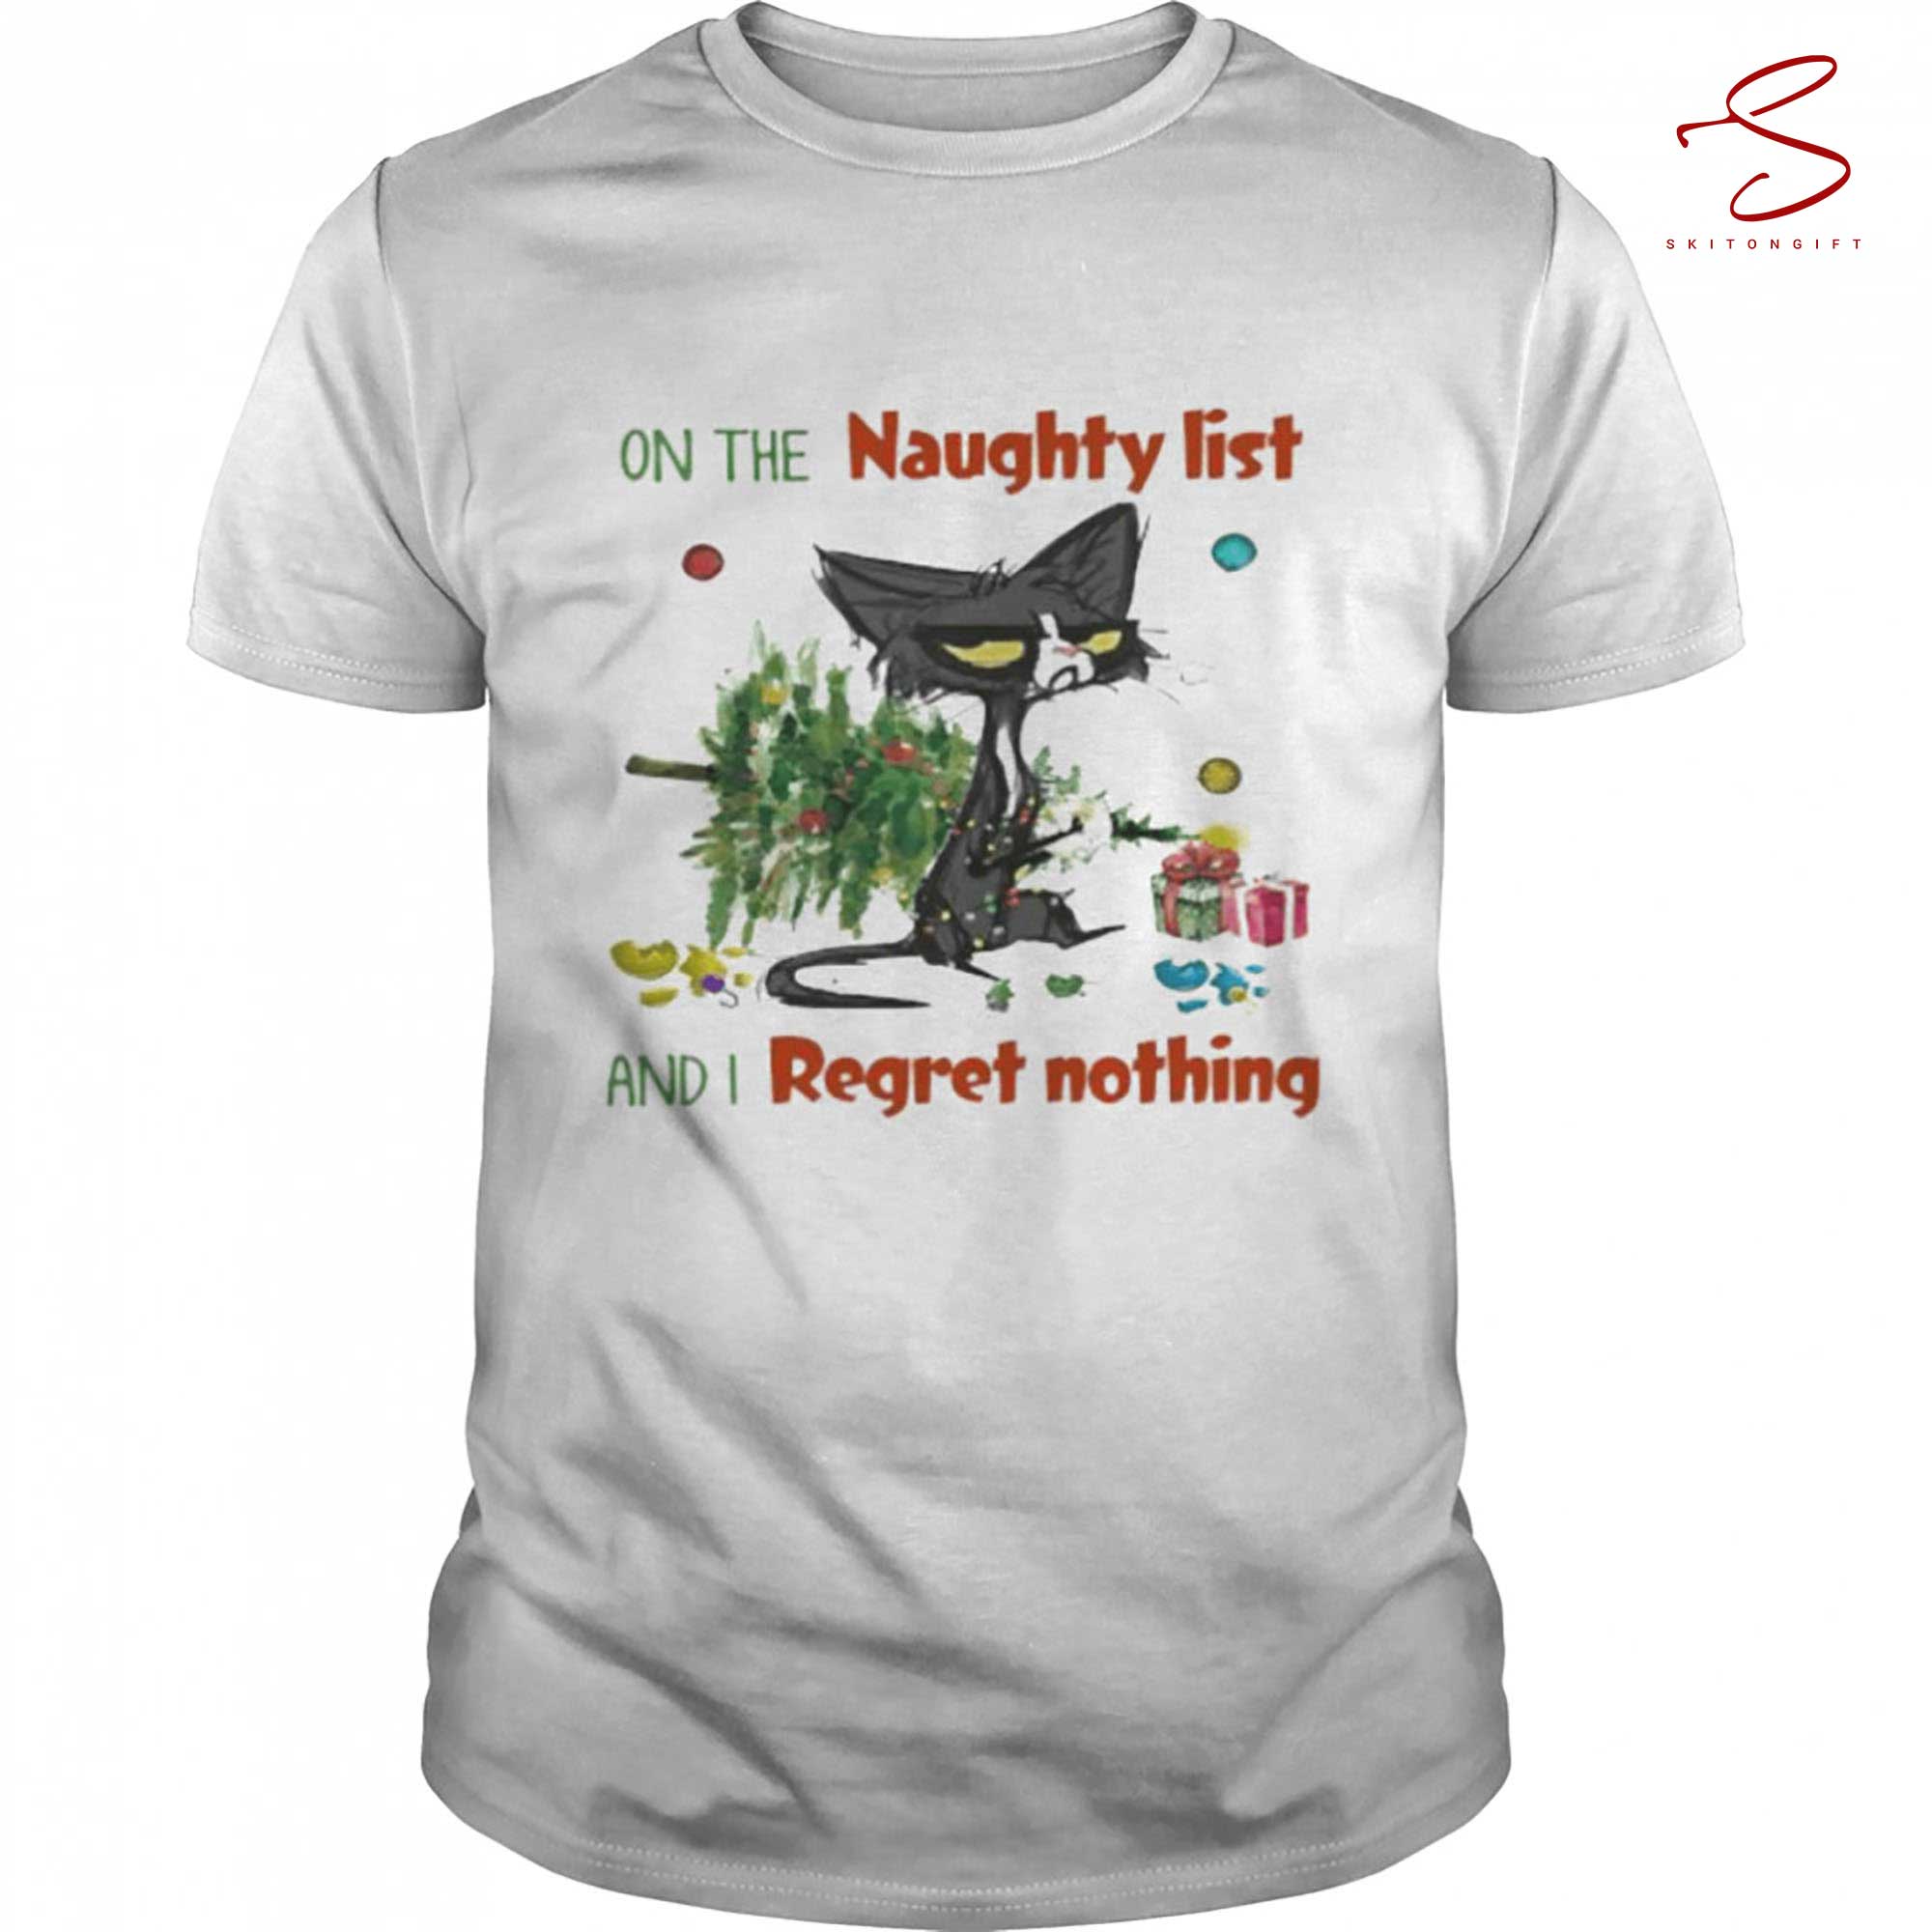 Skitongift Black Cat On The Naugfhty List And I Reget Nothing Christmas T Shirt